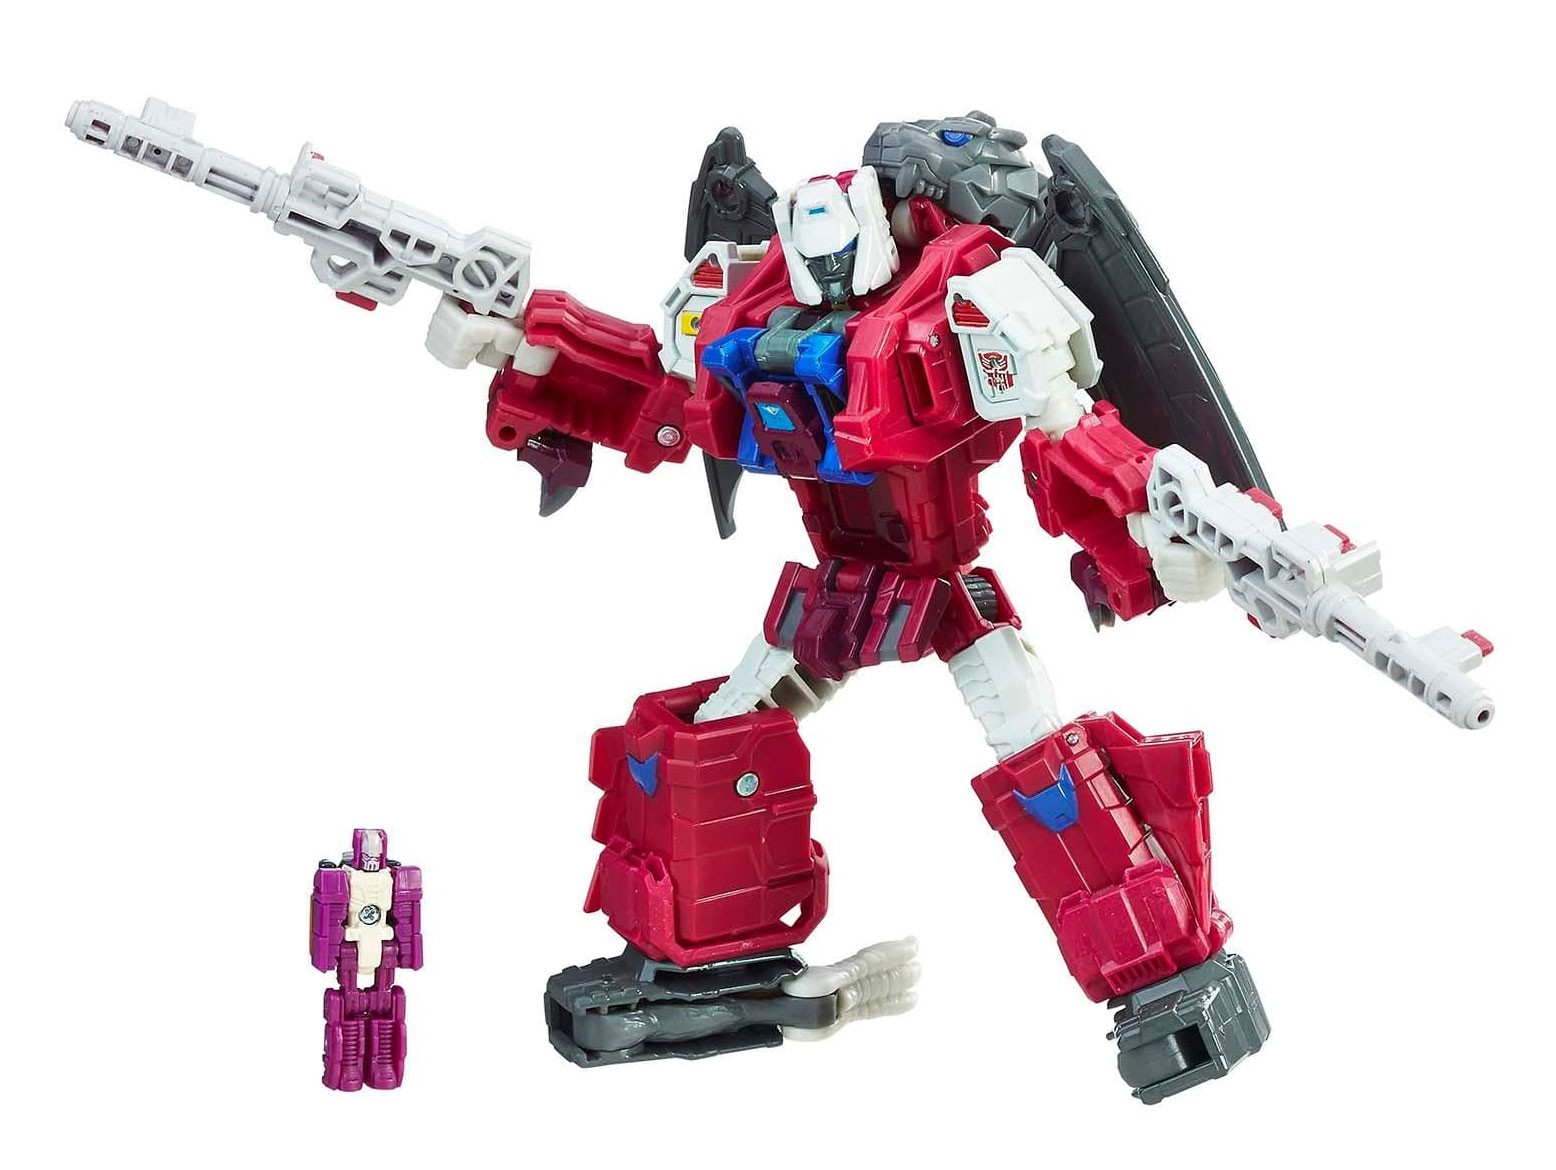 Transformers News: NYCC 2017: Titans Return Grotusque revealed and now available!